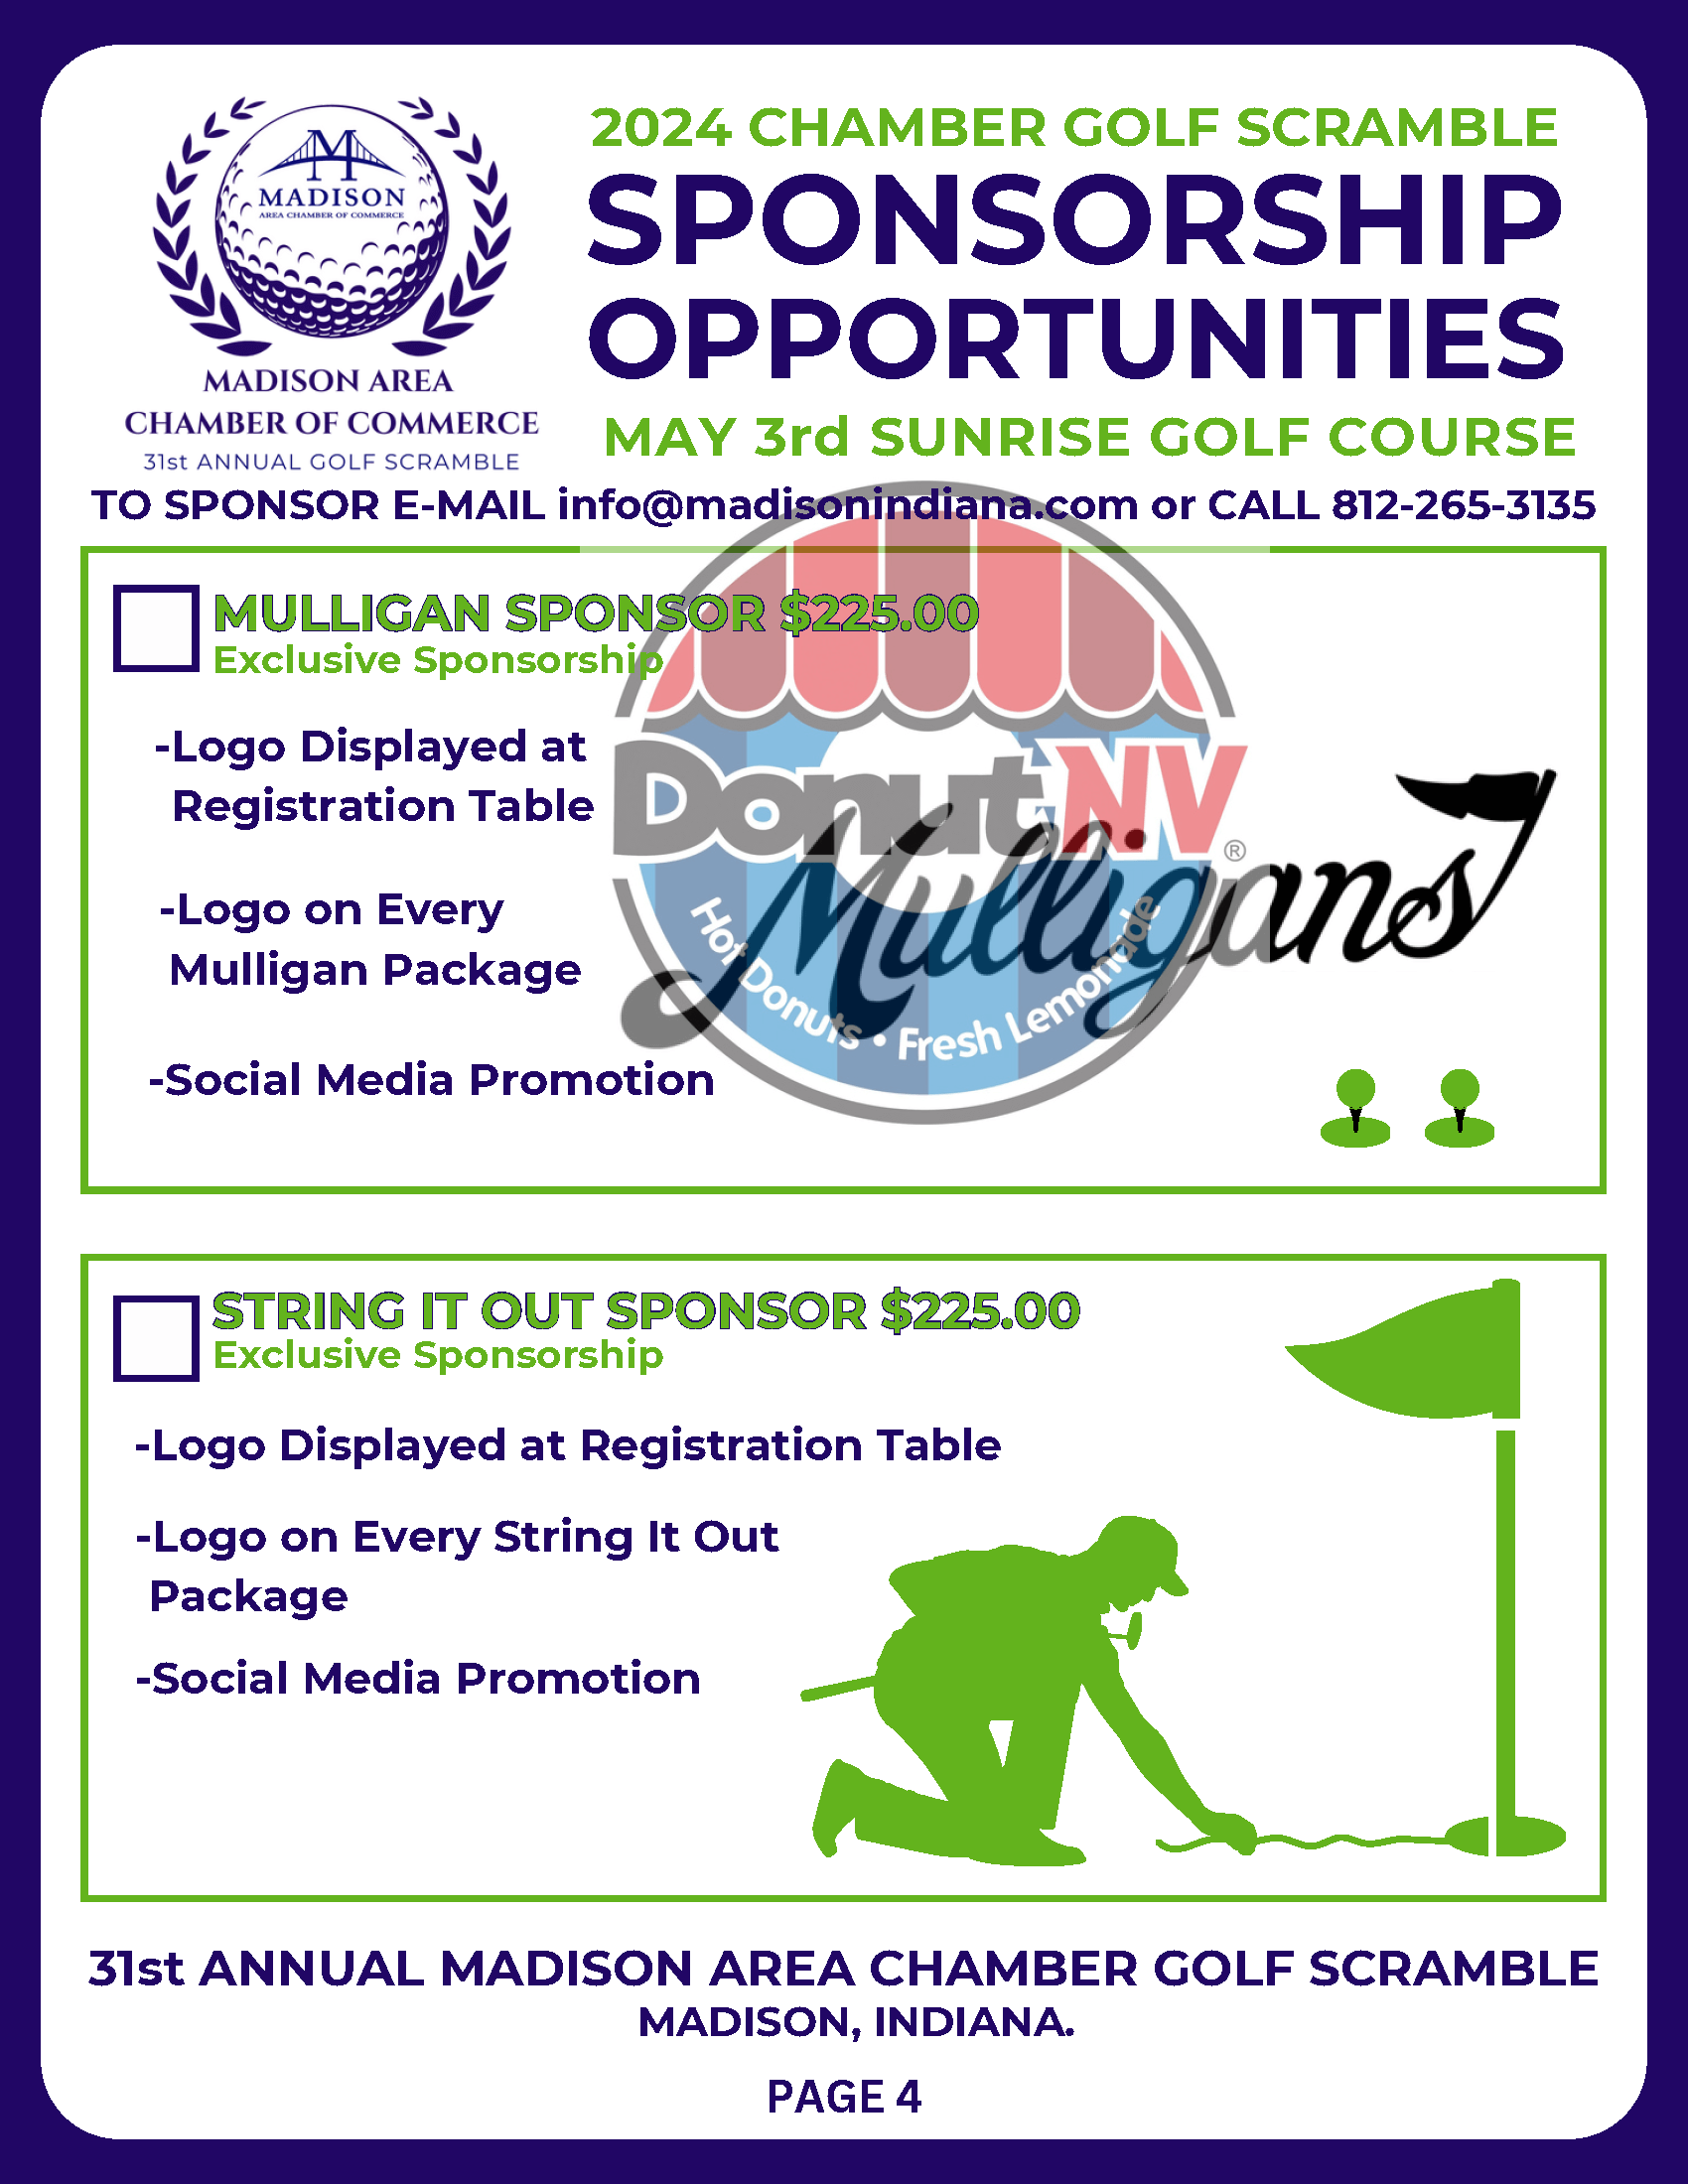 2024 Madison area Chamber of Commerce 31st Annual Golf Scramble Sponsorship Opportunities - Mulligan & String It Out Sponsor